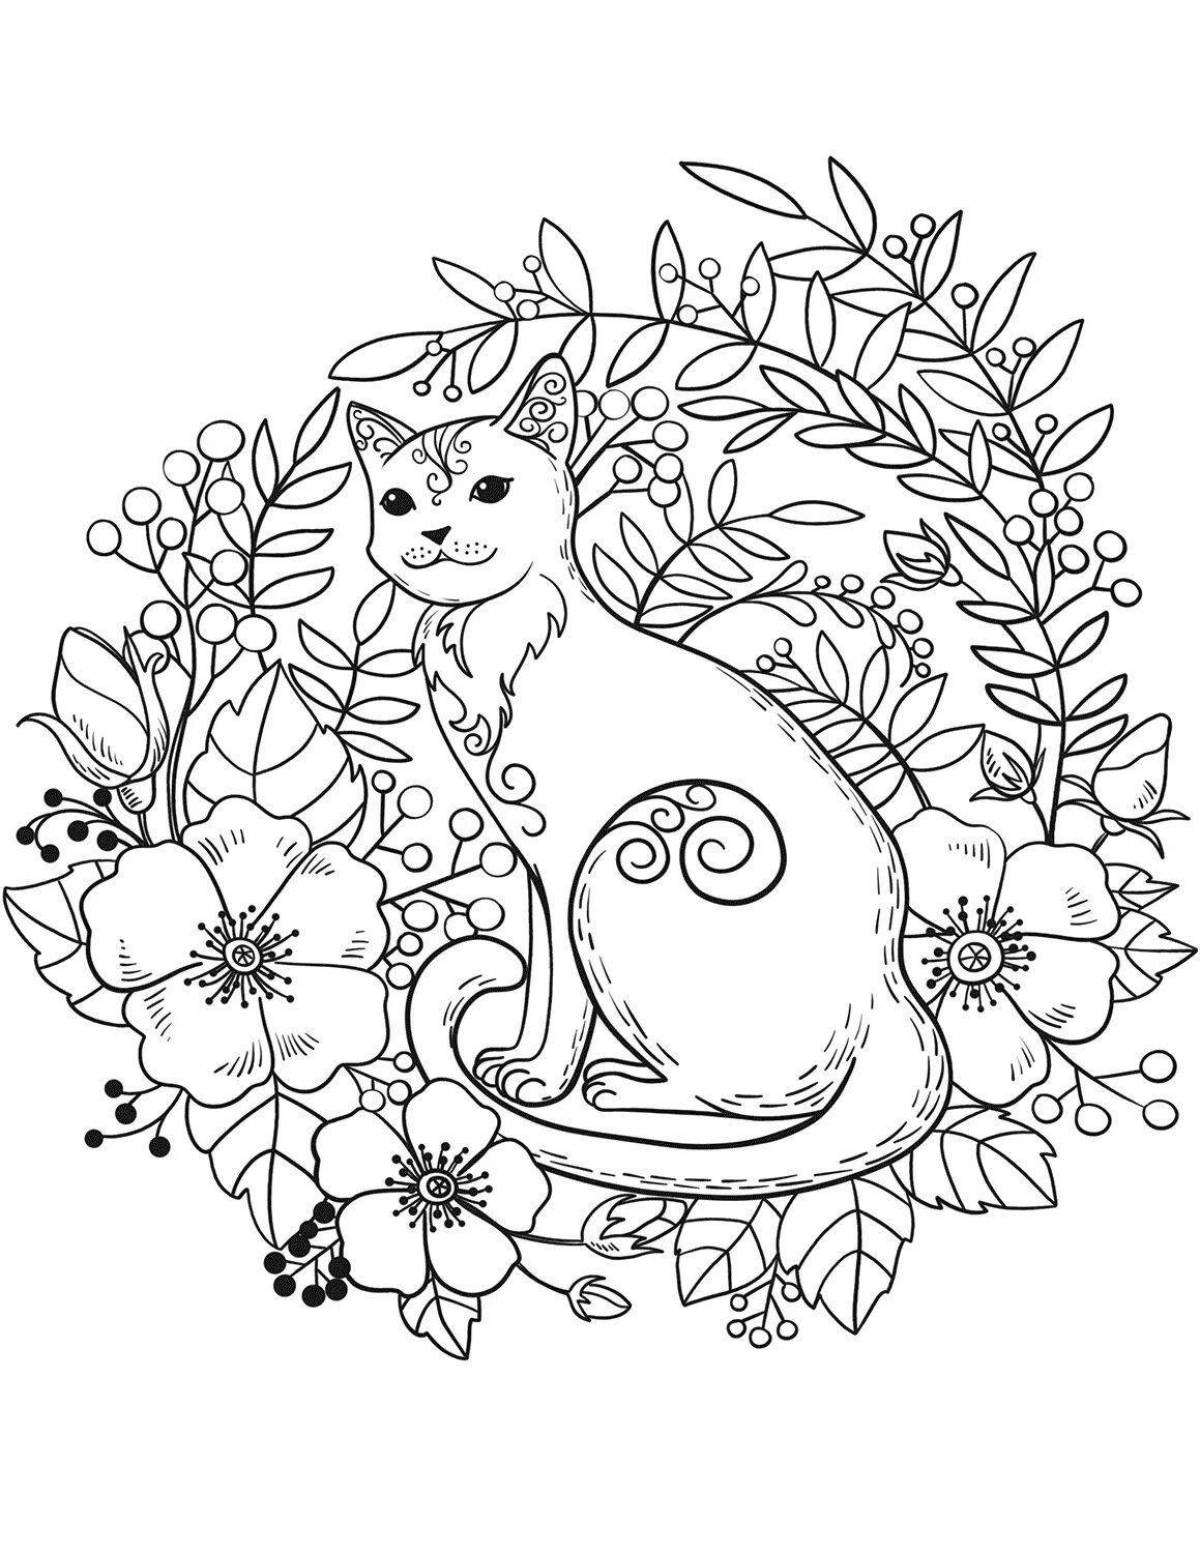 Cute cat coloring page